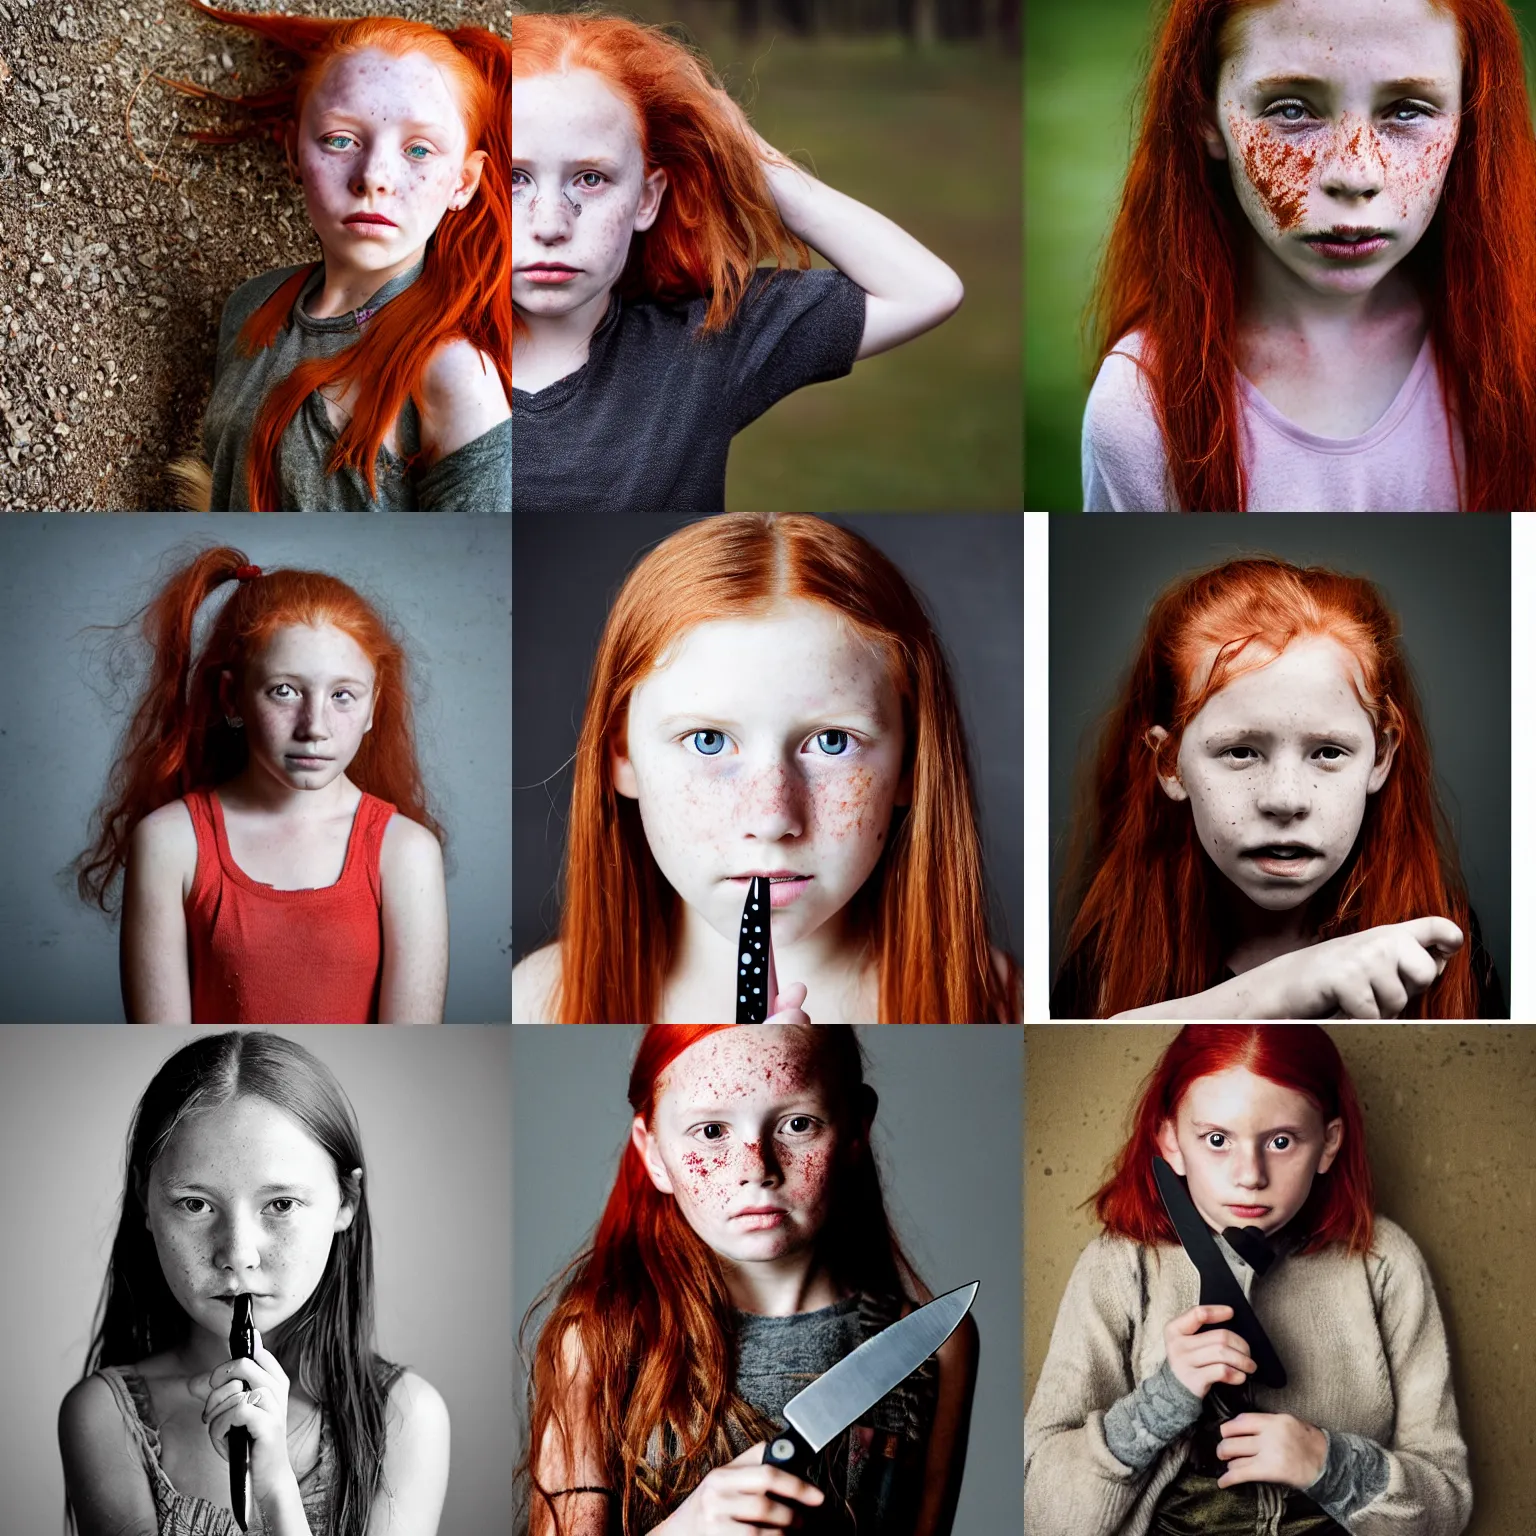 Prompt: Photograph of a 10 year old girl holding a knife in the style of Annie Leibovitz, red hair, freckles